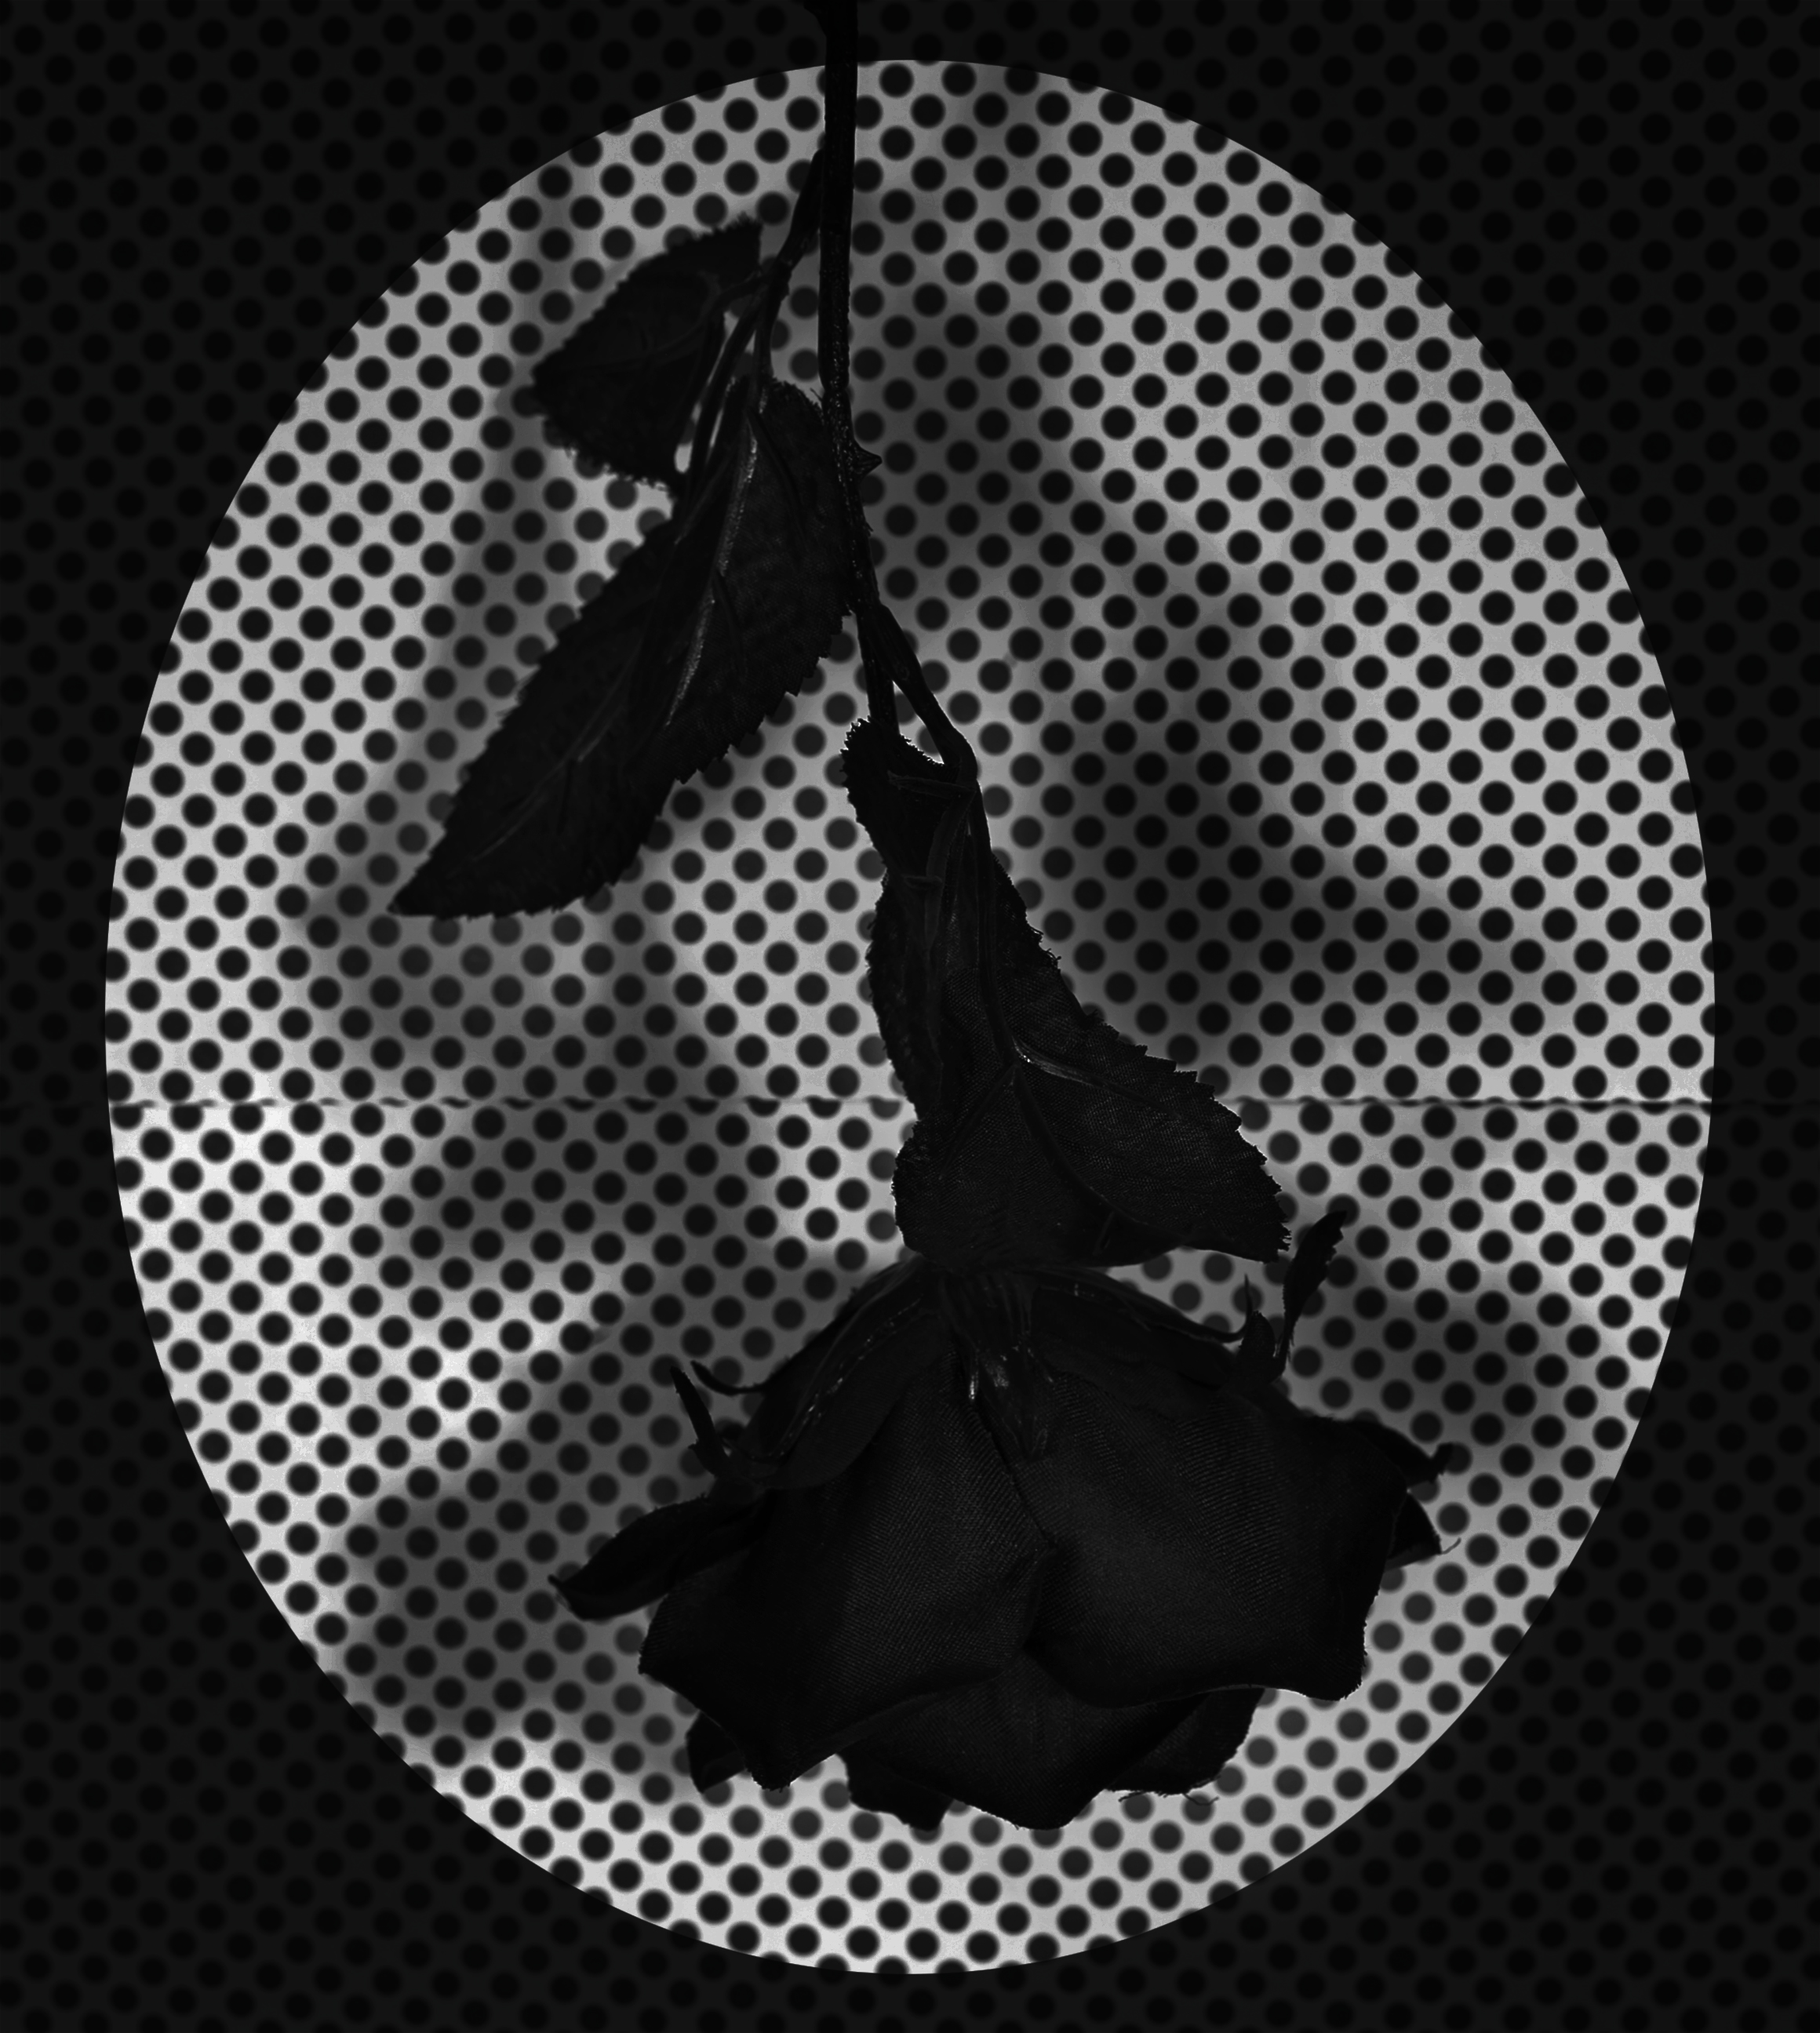 Fake Flower Study No. 3 from Mind Loop, 20 by 24 inches, Archival Pigment Print, 2018